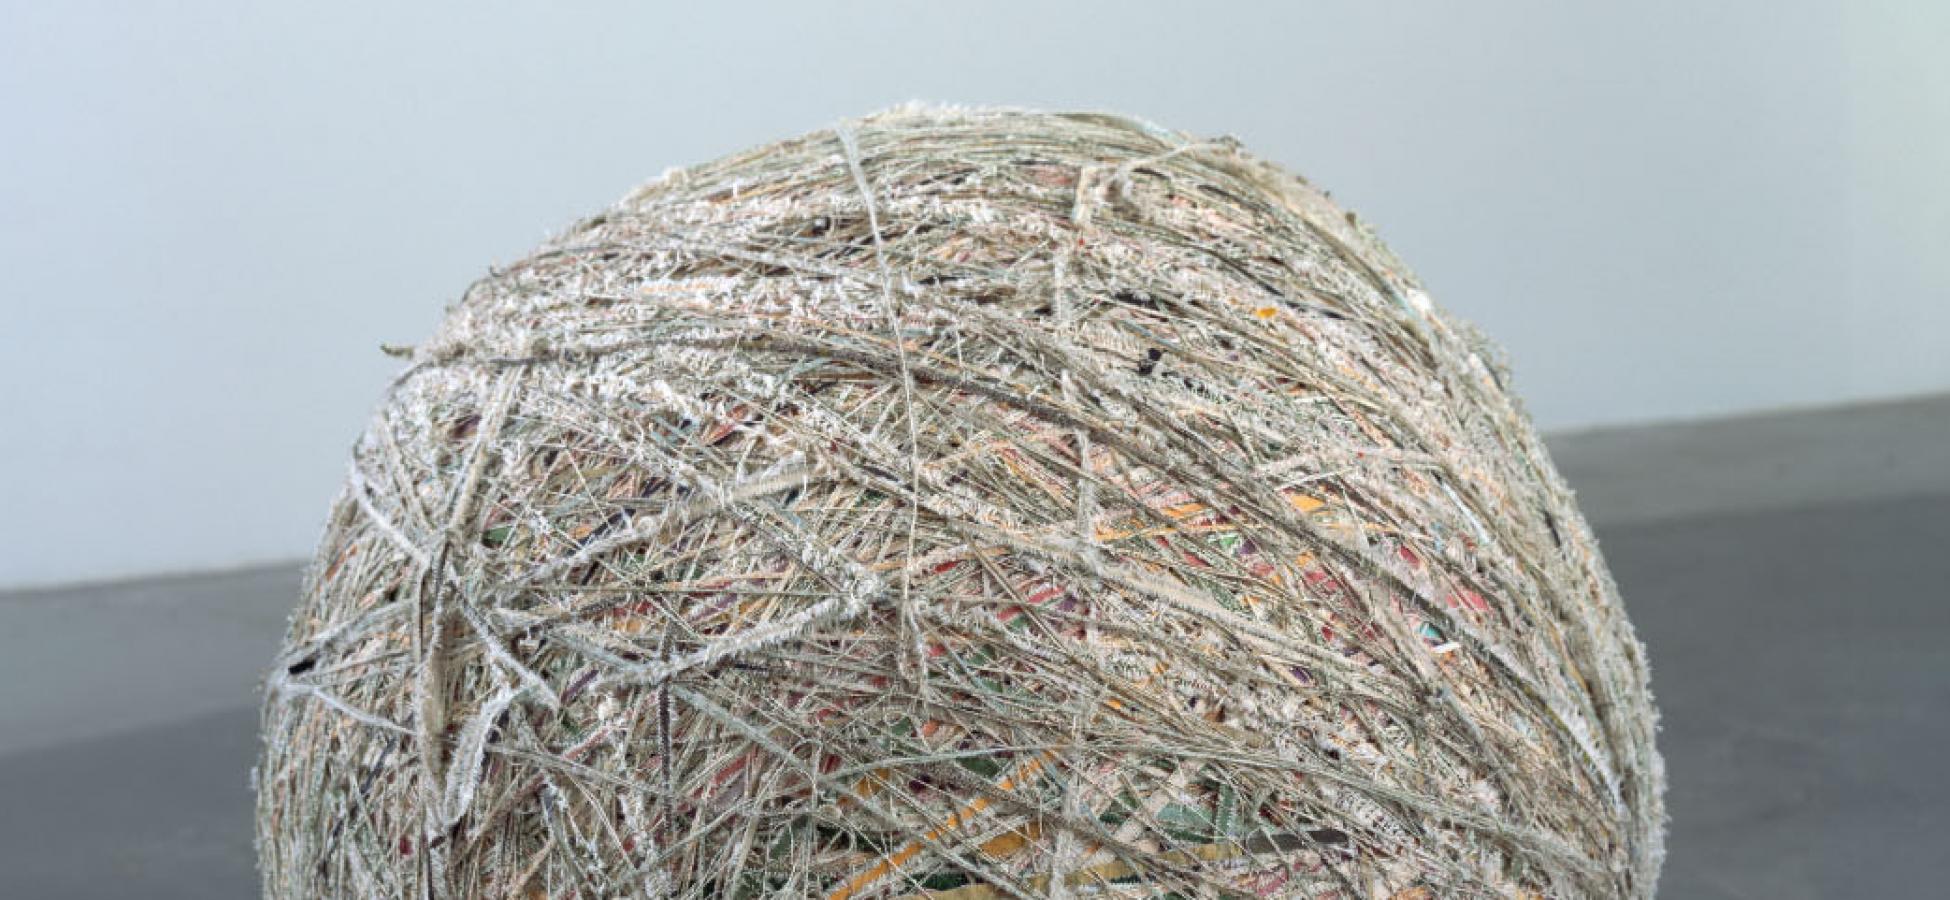 Cover of a book called Rethinking Global Modernism shows a large ball of string